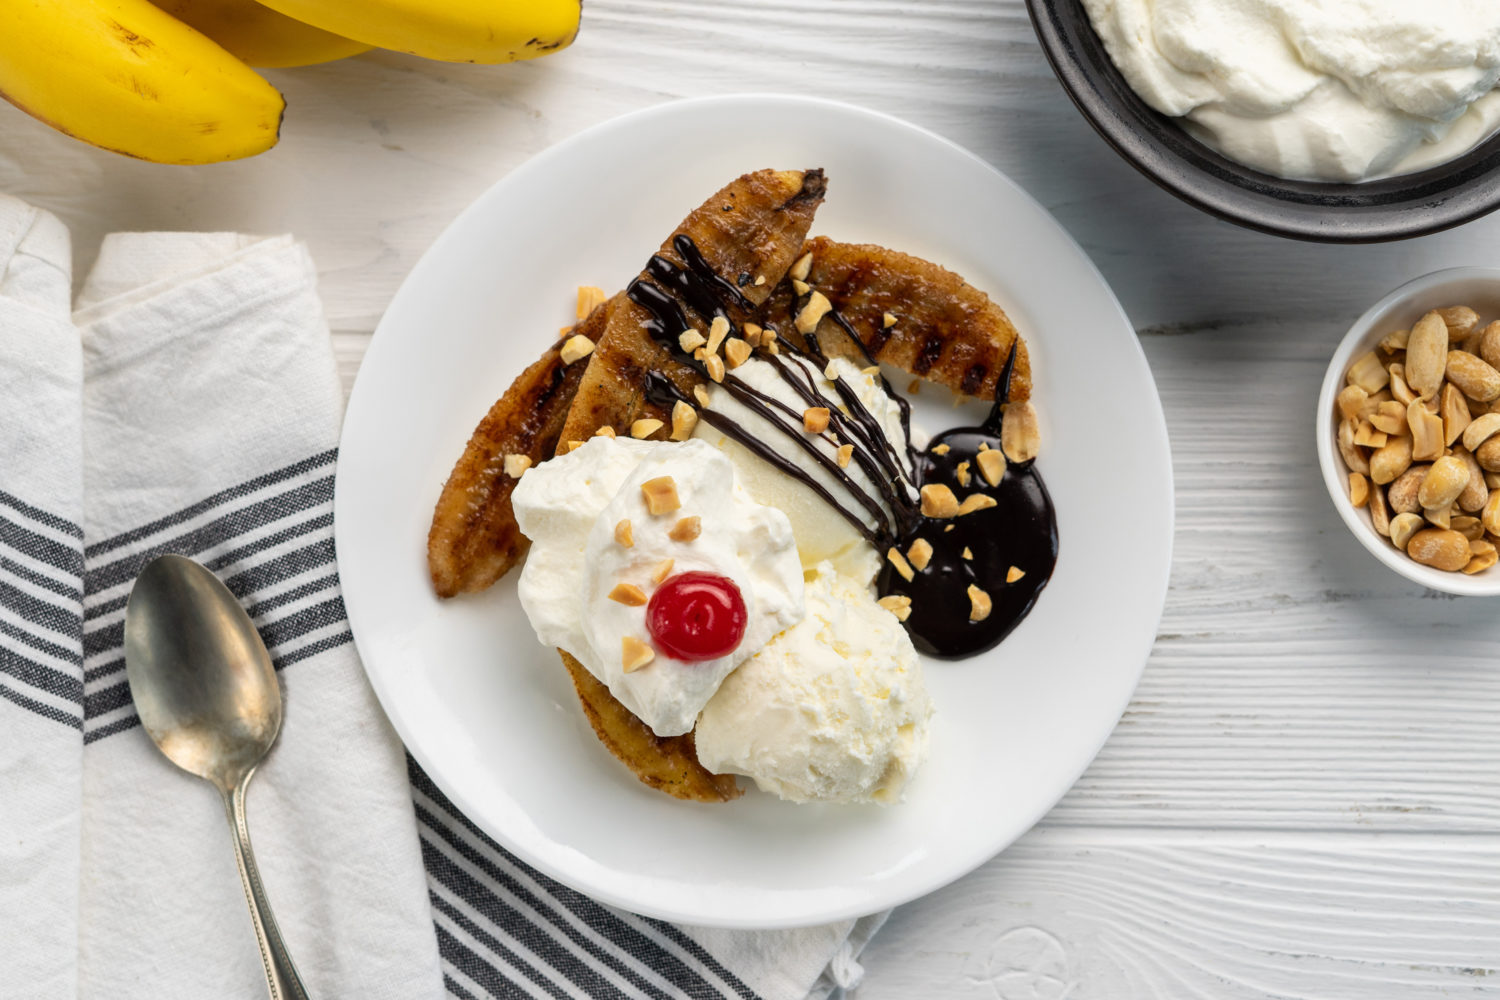 grilled bananas topped with ice cream